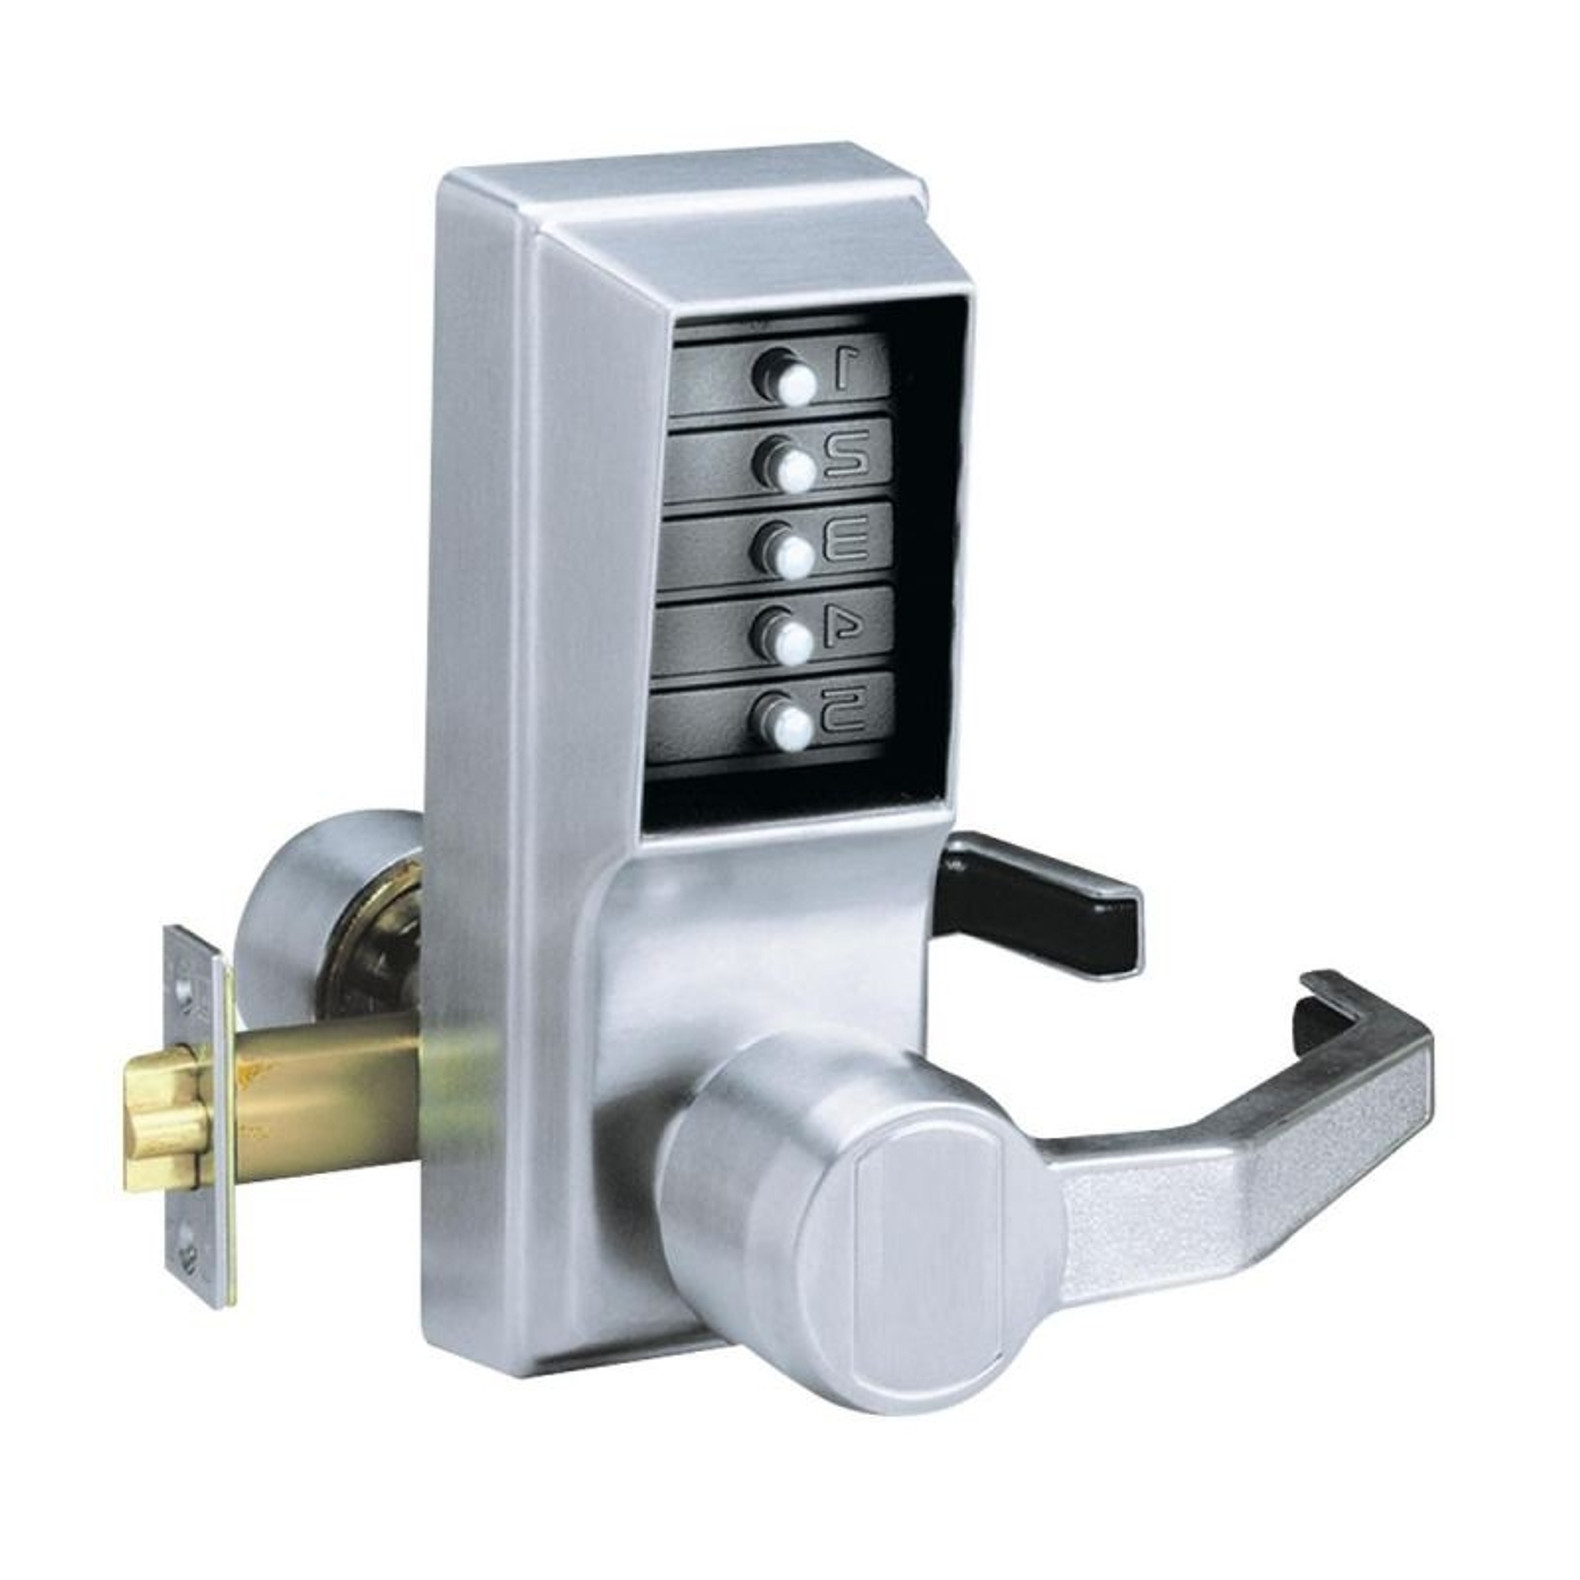 Kaba Simplex L1000 Series Metal Mechanical Pushbutton Cylindrical Lock with  Lever, Key Override, 13mm Throw Latch, Floating Face Plate, 70mm Backset,  通販